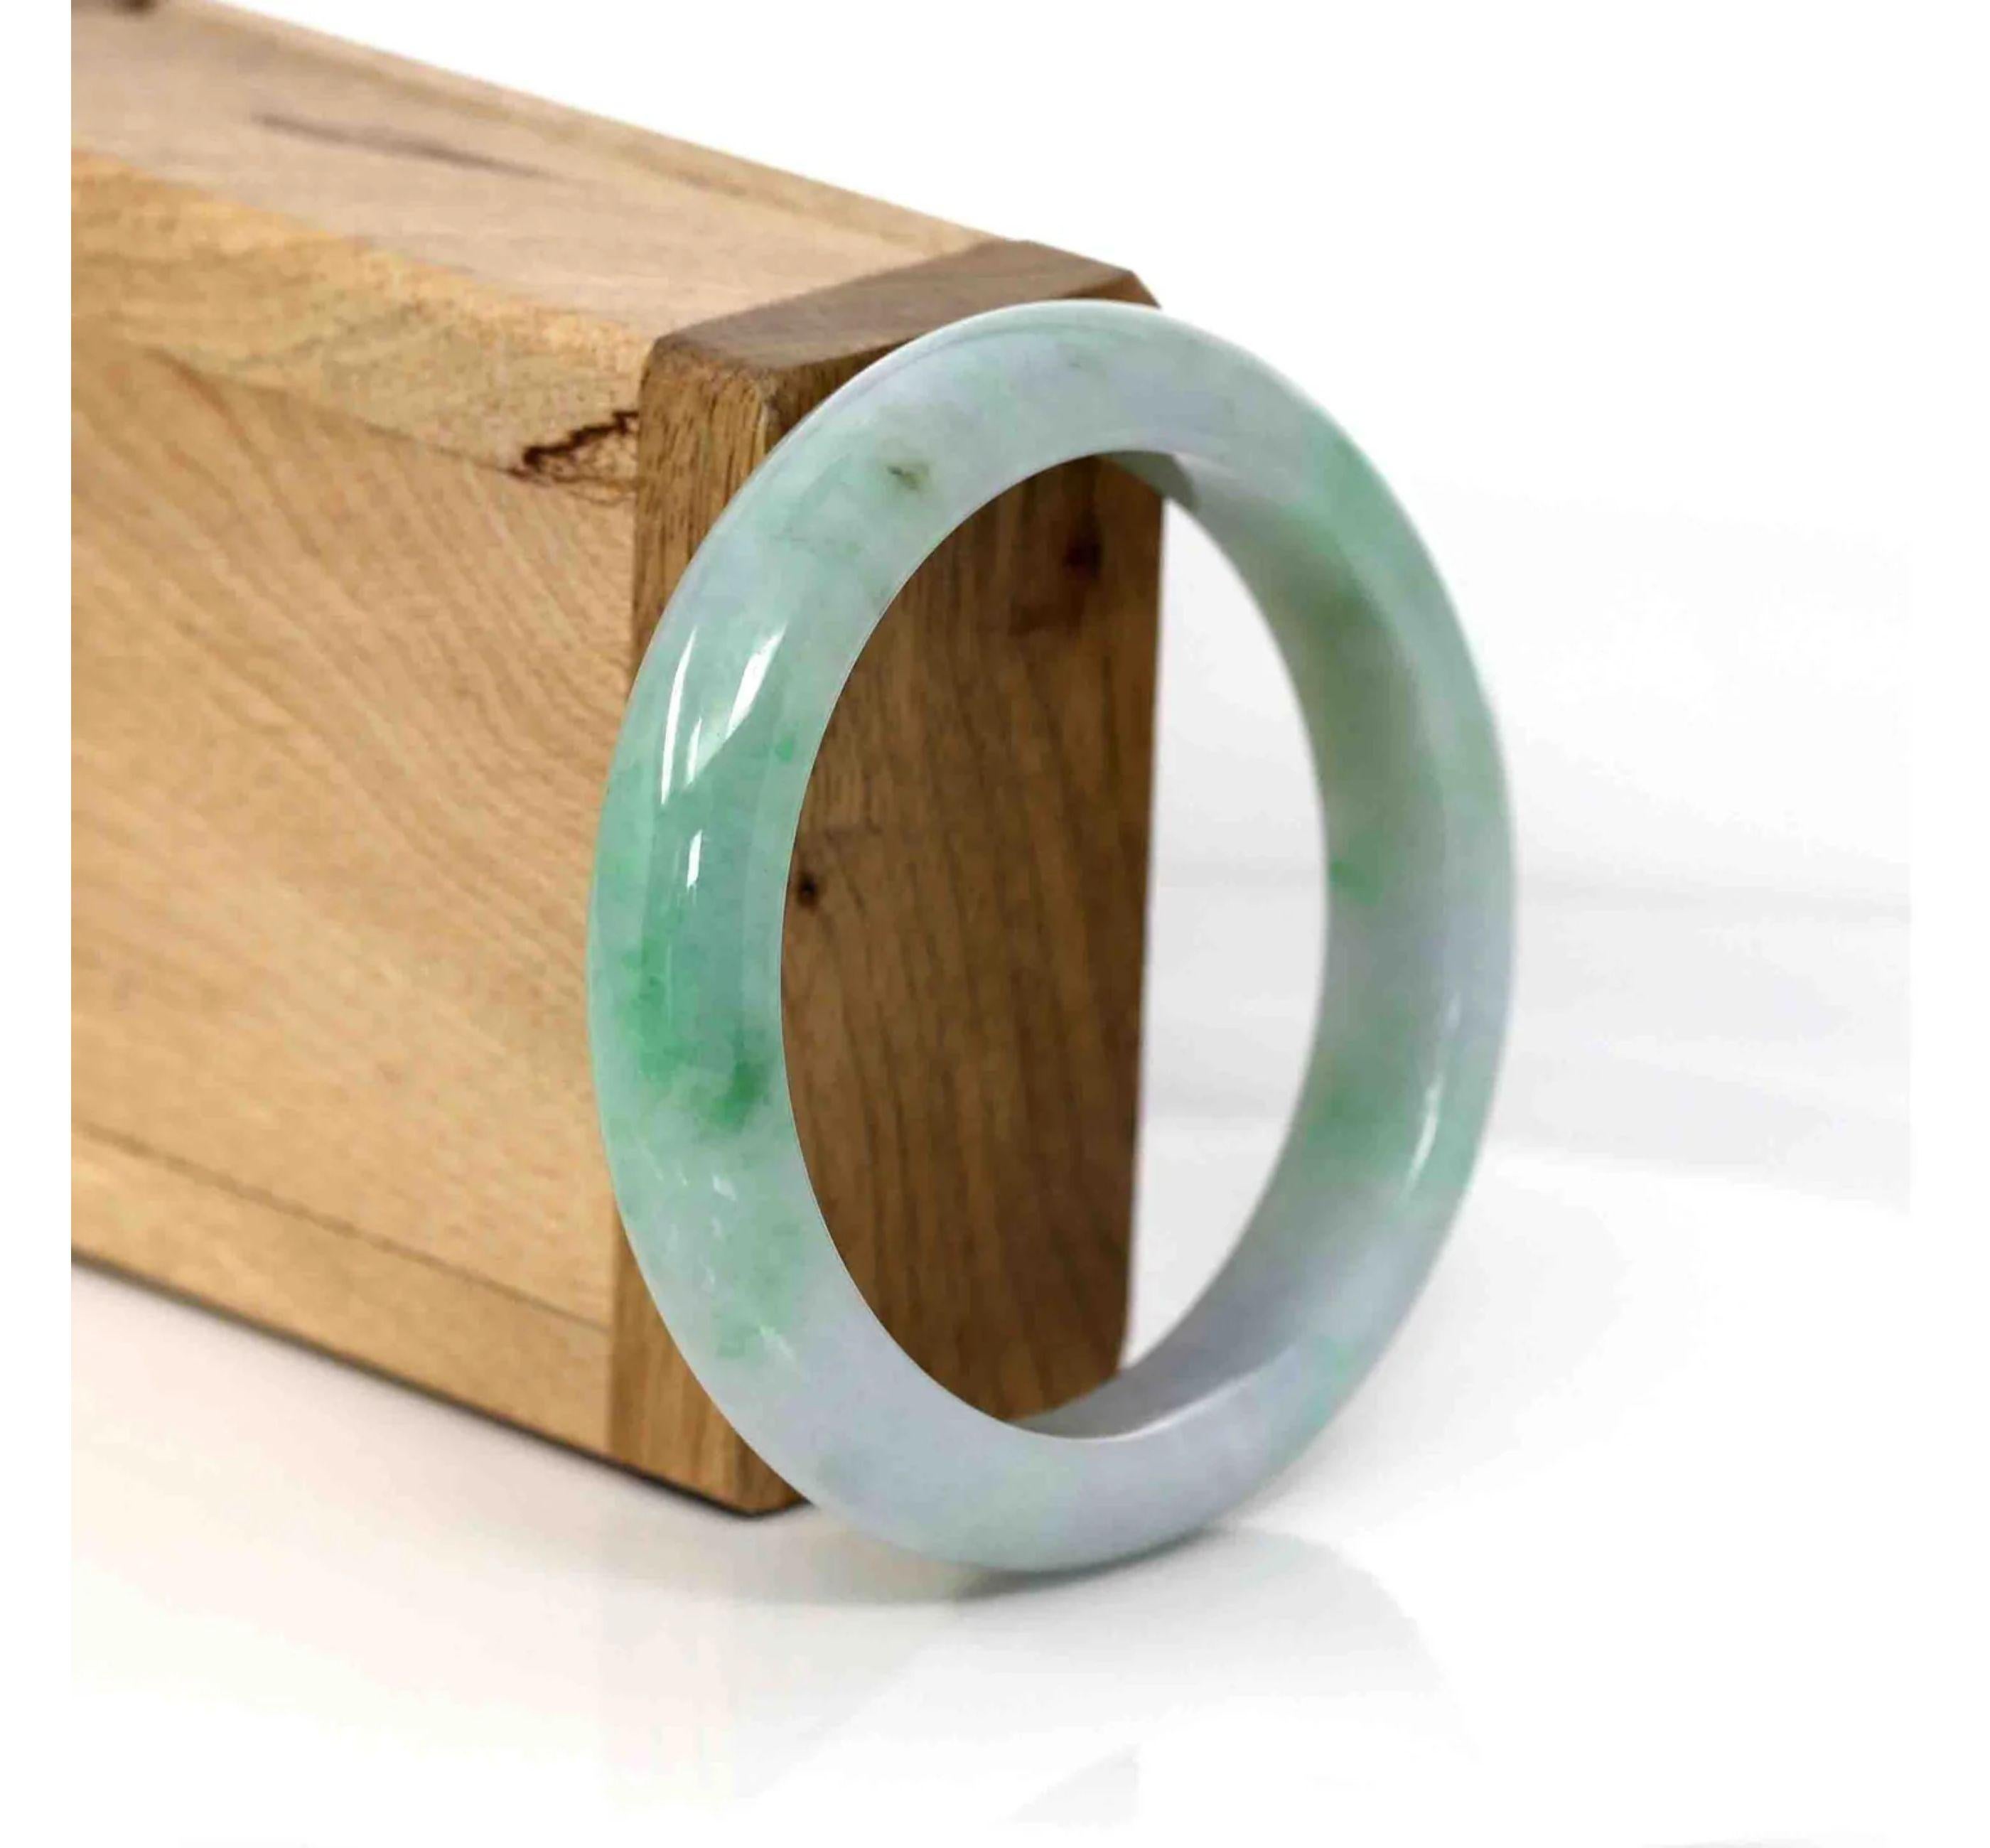 * DETAILS--- Genuine Burmese Jadeite Jade Bangle Bracelet. This bangle is made with fine genuine Burmese Jadeite jade. The jade texture is very good and smooth with green-lavender color. It is a luxury and perfect bangle. The Classic half-round